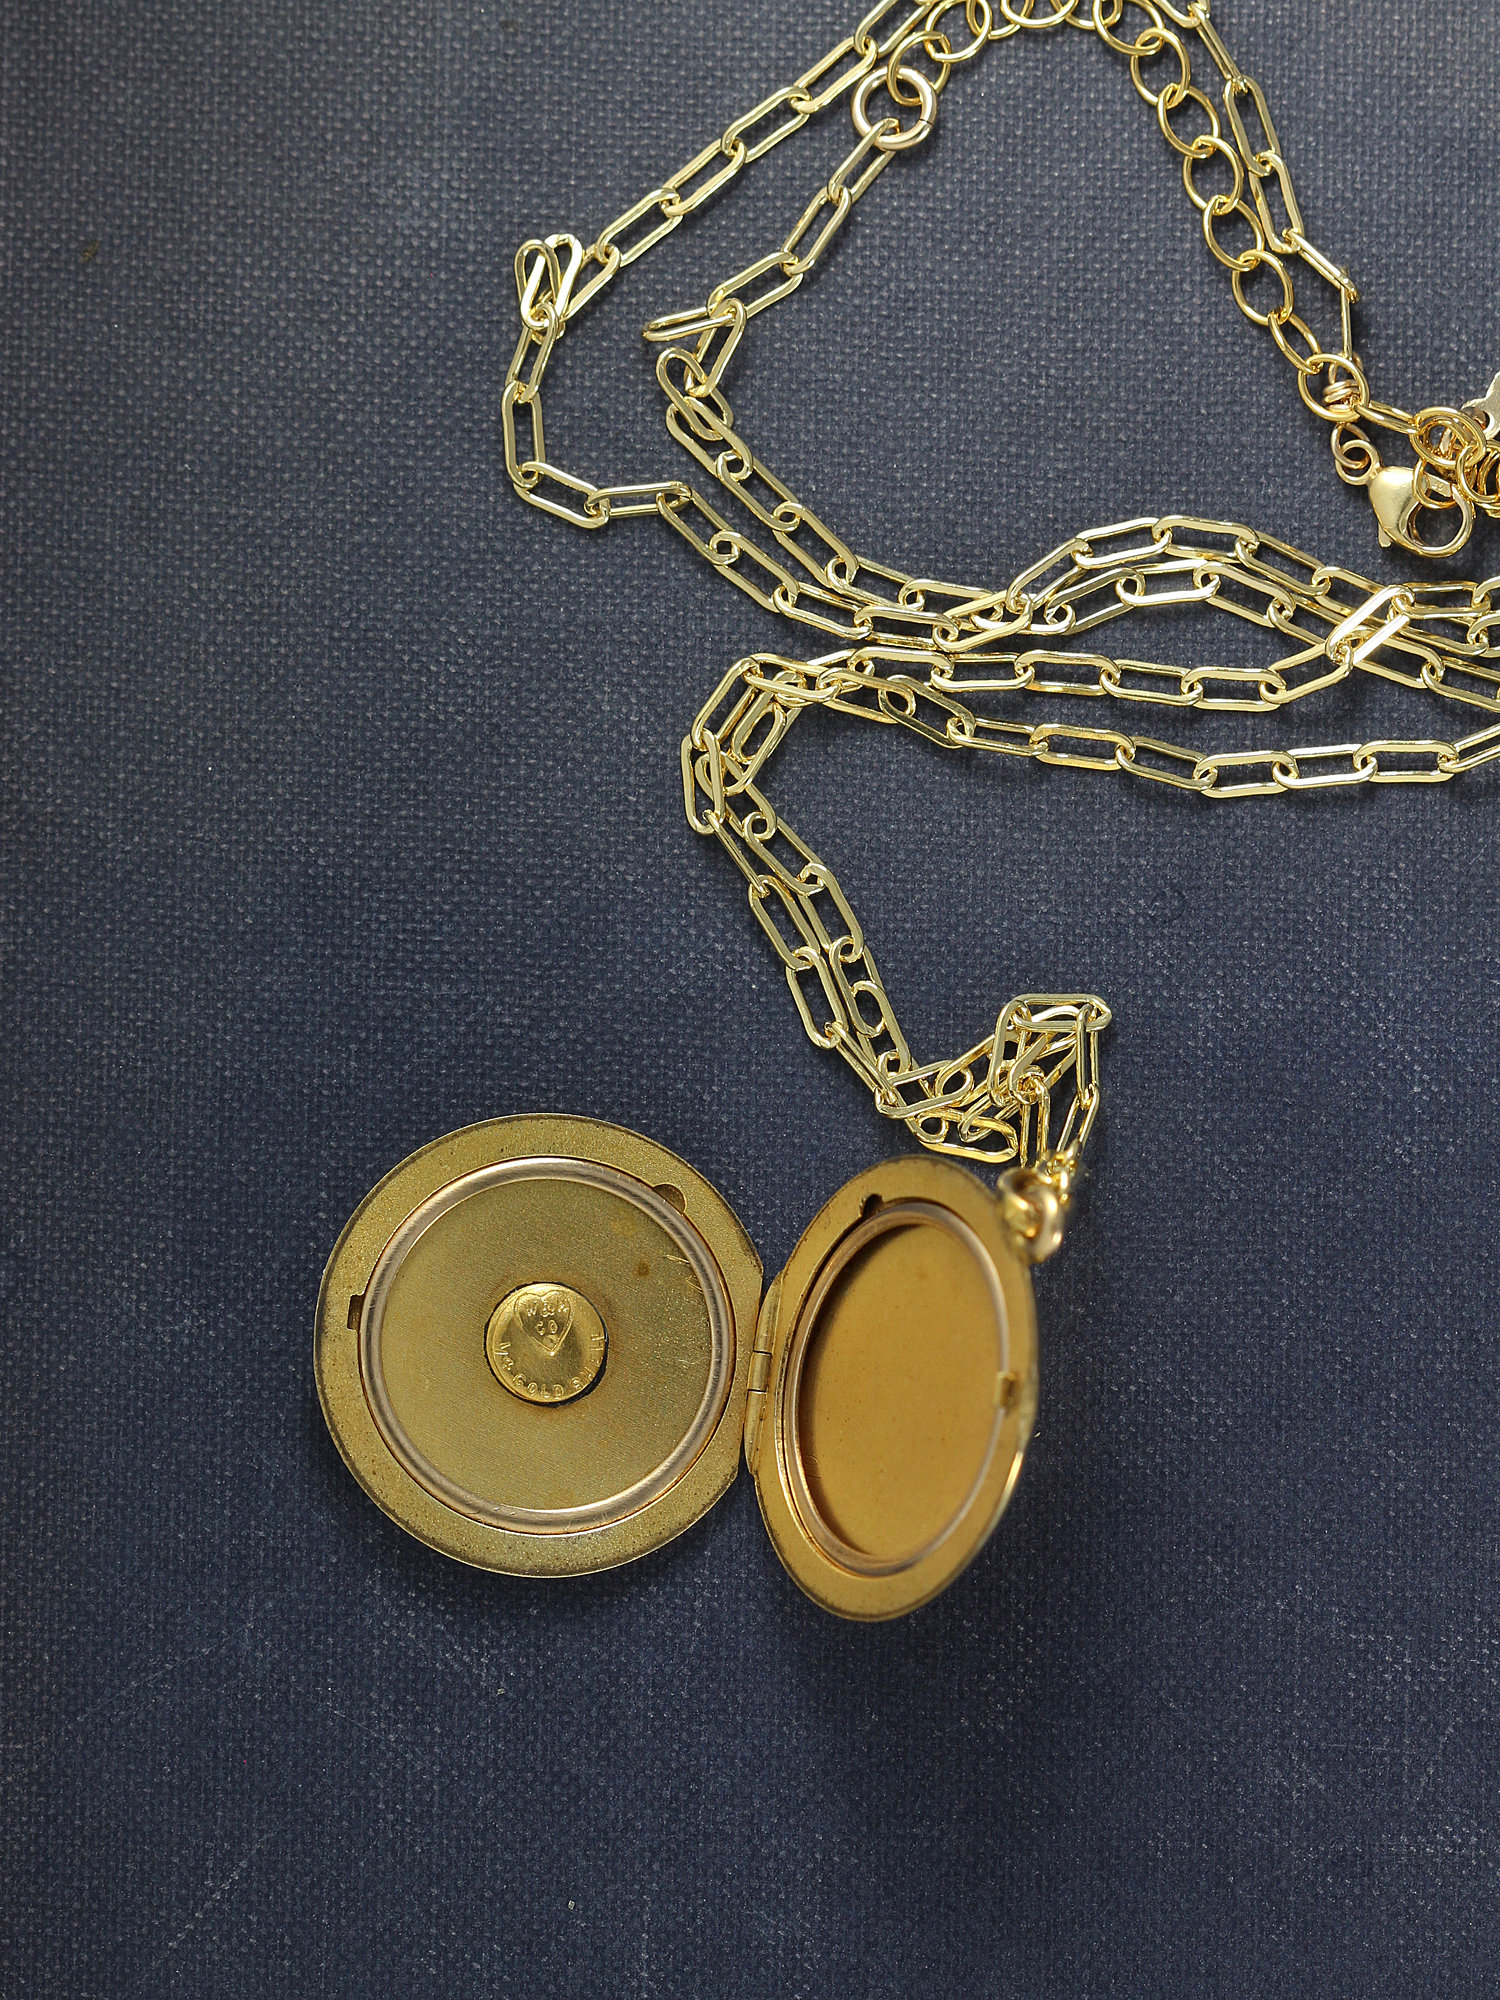 Antique Gold Locket Necklace, Small Round W&H Co Photo Pendant ...